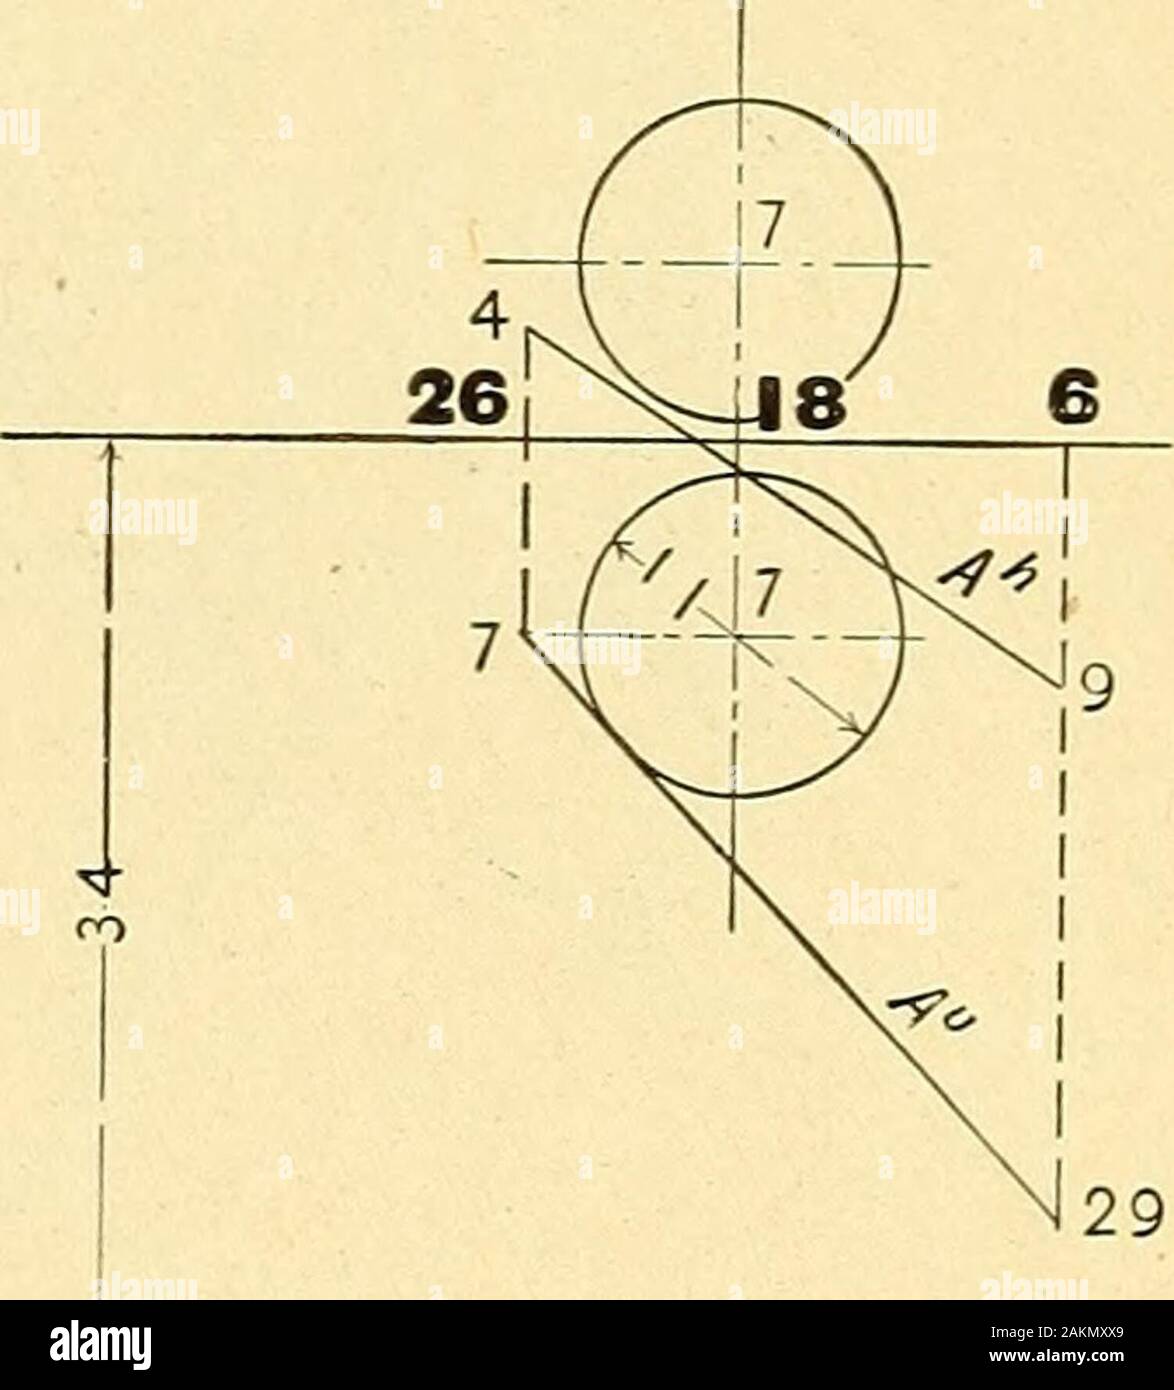 Descriptive geometry . Problems 1-4. Draw the traces of a plane which is tangent at point a of the surface. (Art. Ill, page 78.) Problems 5, 6. Draw the traces of a plane w^hich contains point a and is tangent to the surface at the given parallel. (Art. 112,page 79.) Problems 7, 8. Draw the traces of planes tangent to the sphere and containing line A. (Art. 114, page 80.) Unit of measure, | inch. Space required for each problem, 7 x lO inches. Angles bet^veen GL and traces ofplanes, multiples of 15°. Measurements from GL, in light type, and from right-hand division line, in heavy type PLATE 26 Stock Photo